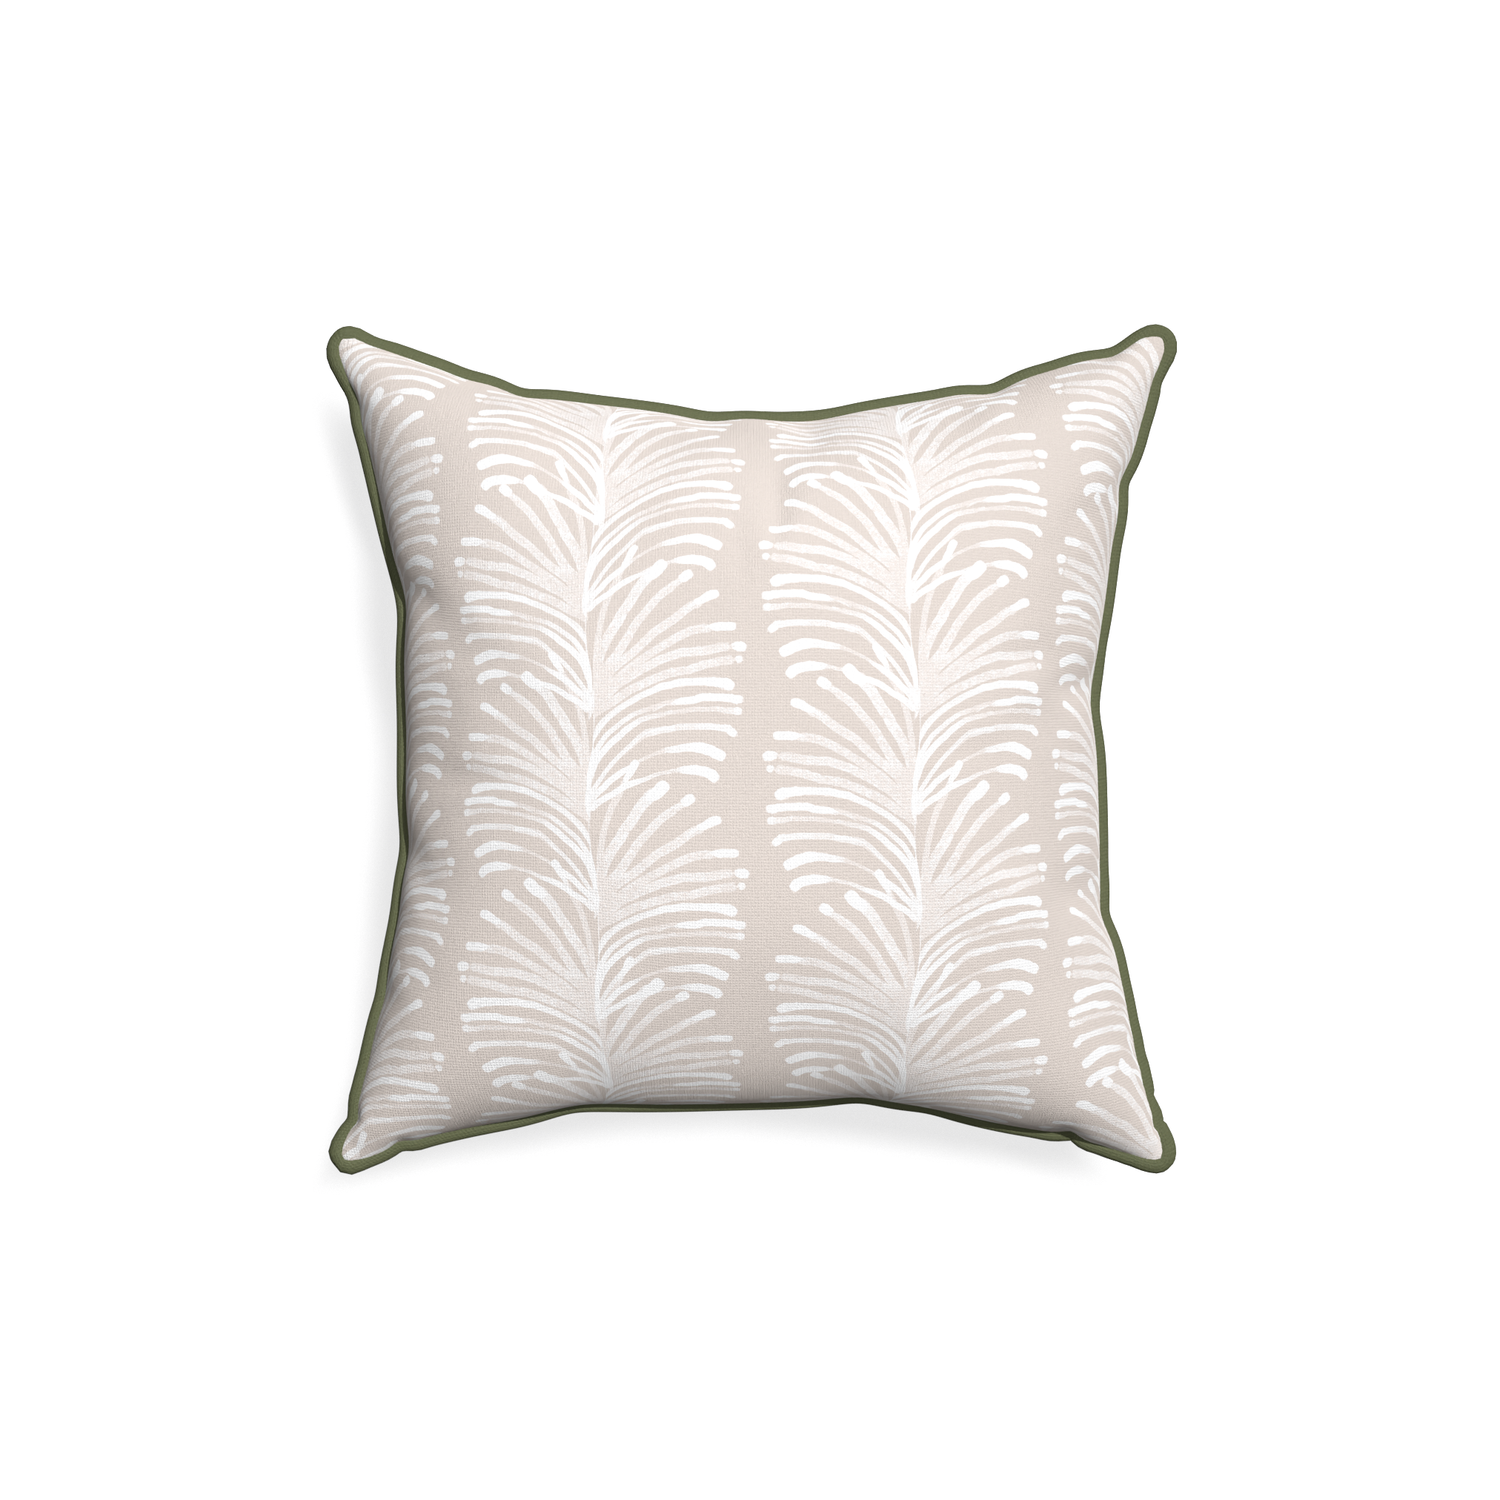 18-square emma sand custom pillow with f piping on white background